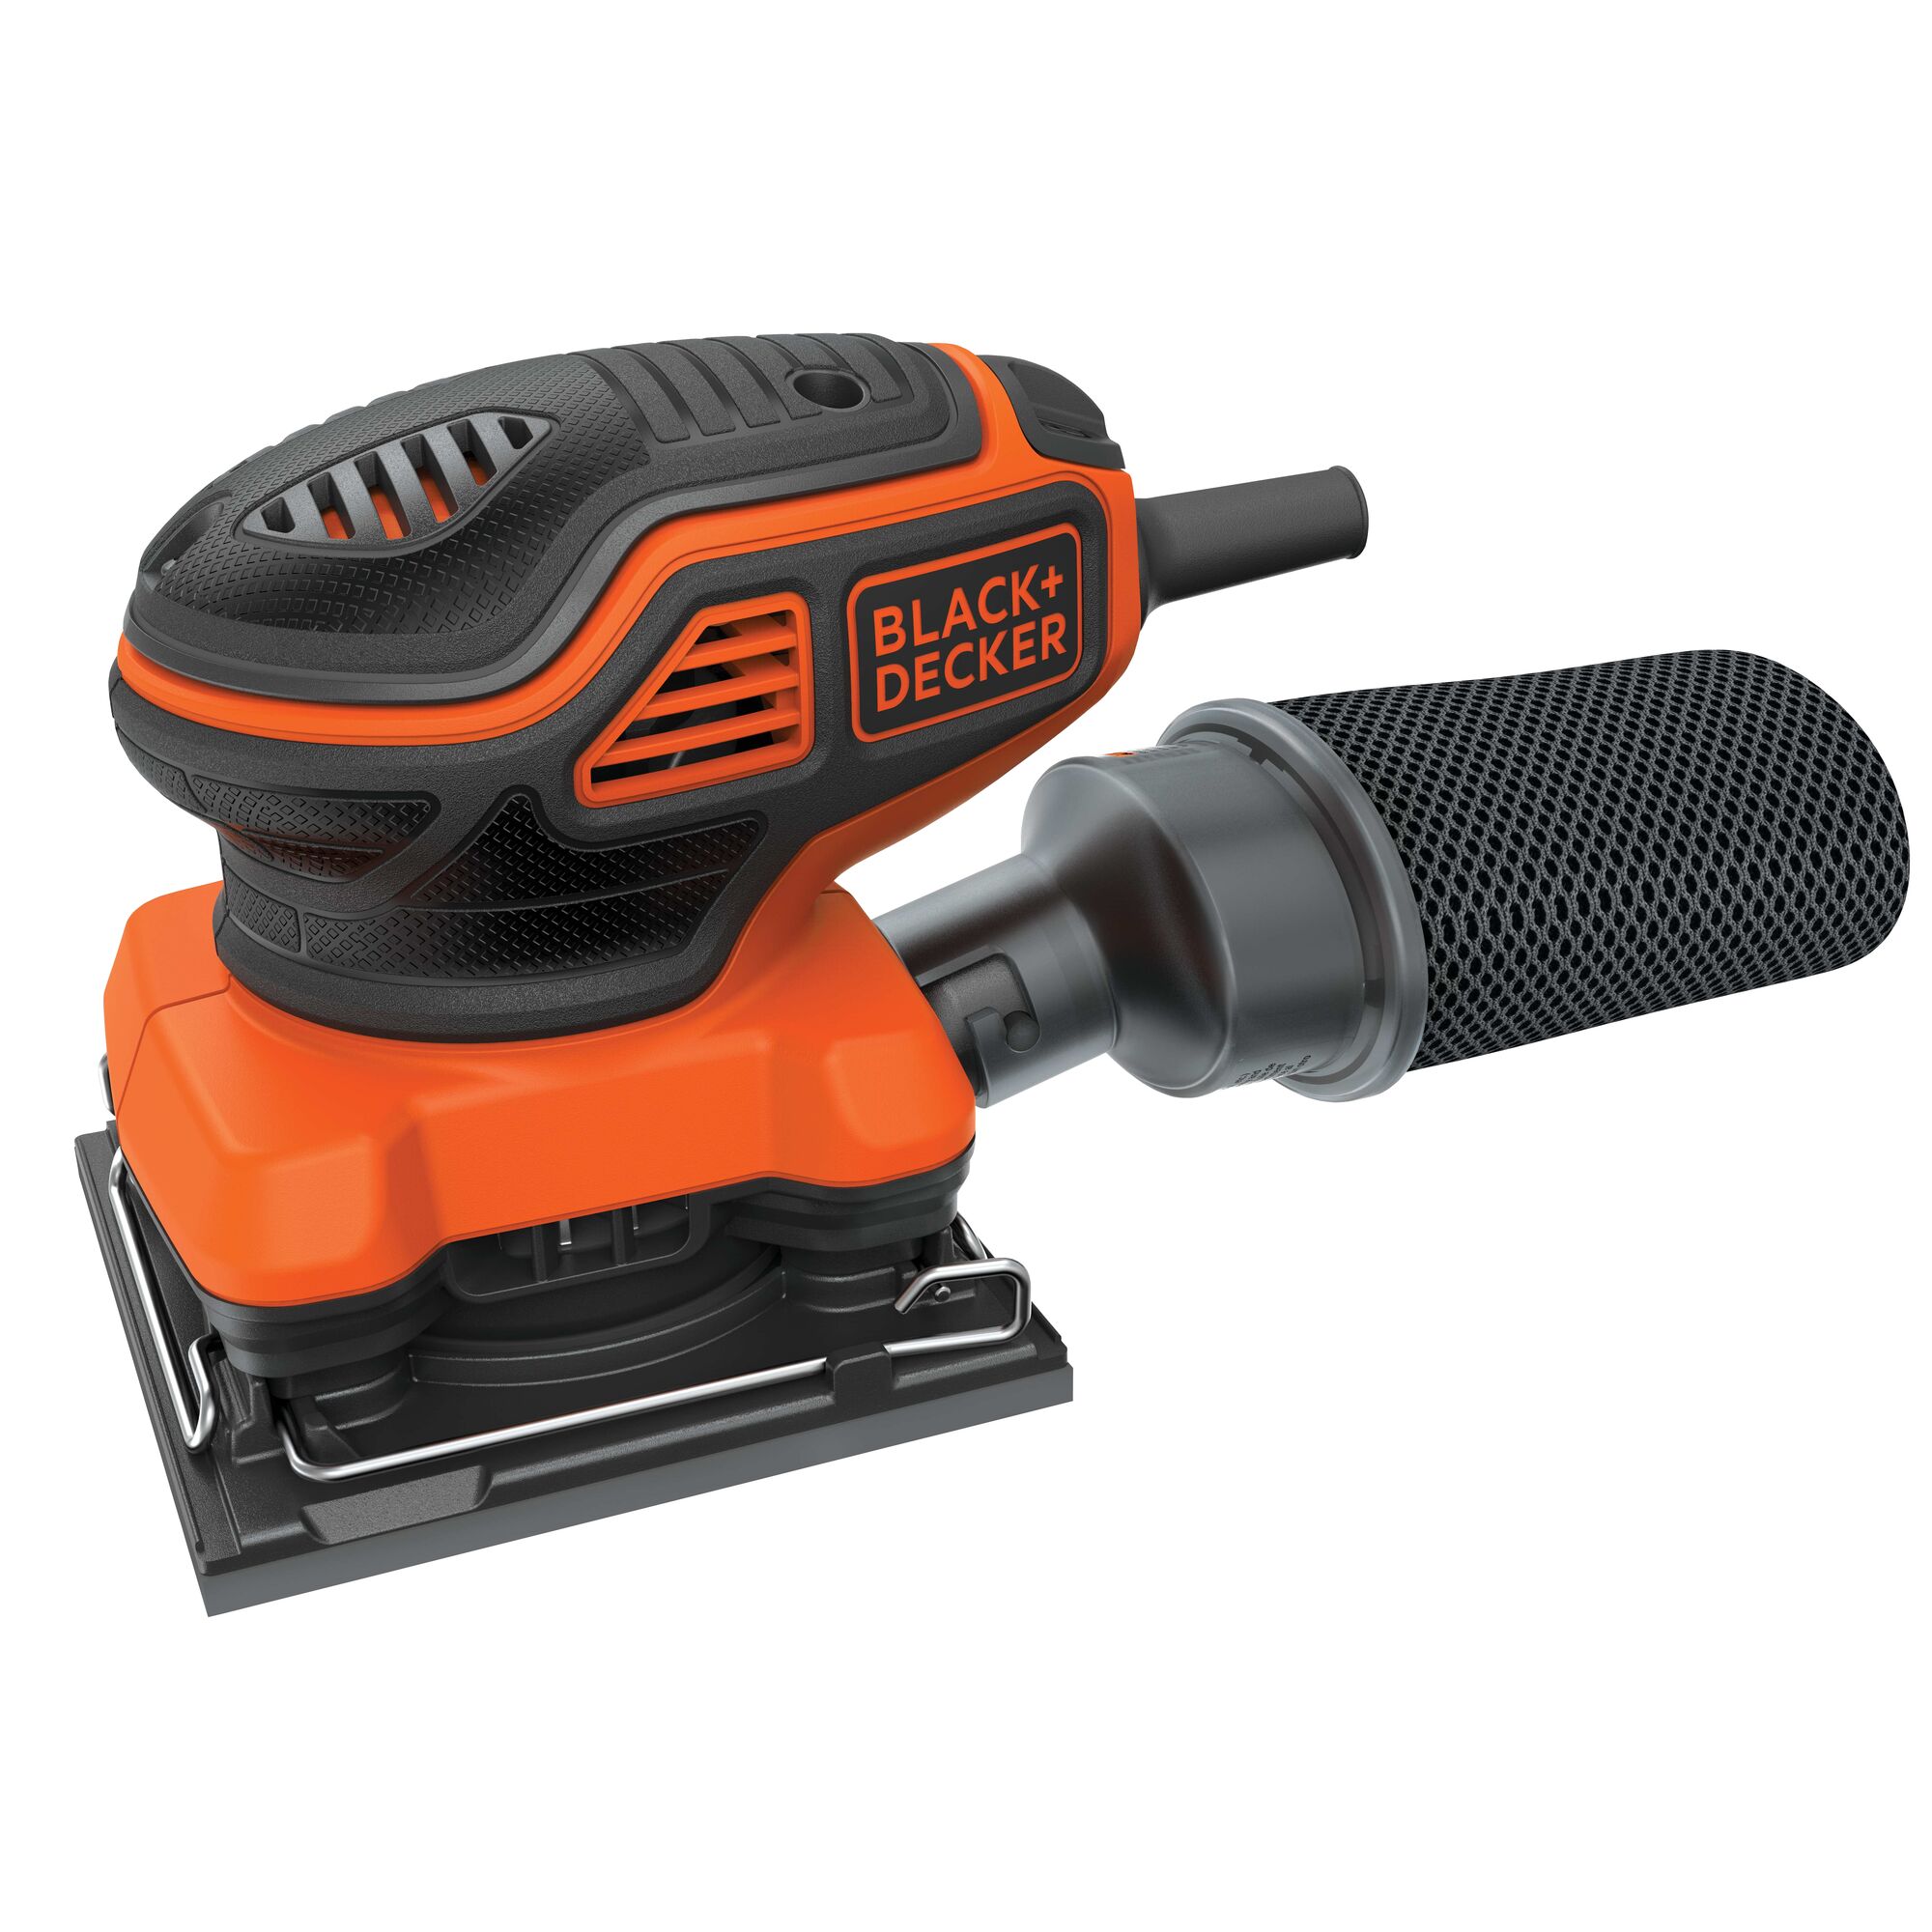 Profile of 1 and a quarter sheet orbital sander with paddle switch actuation.